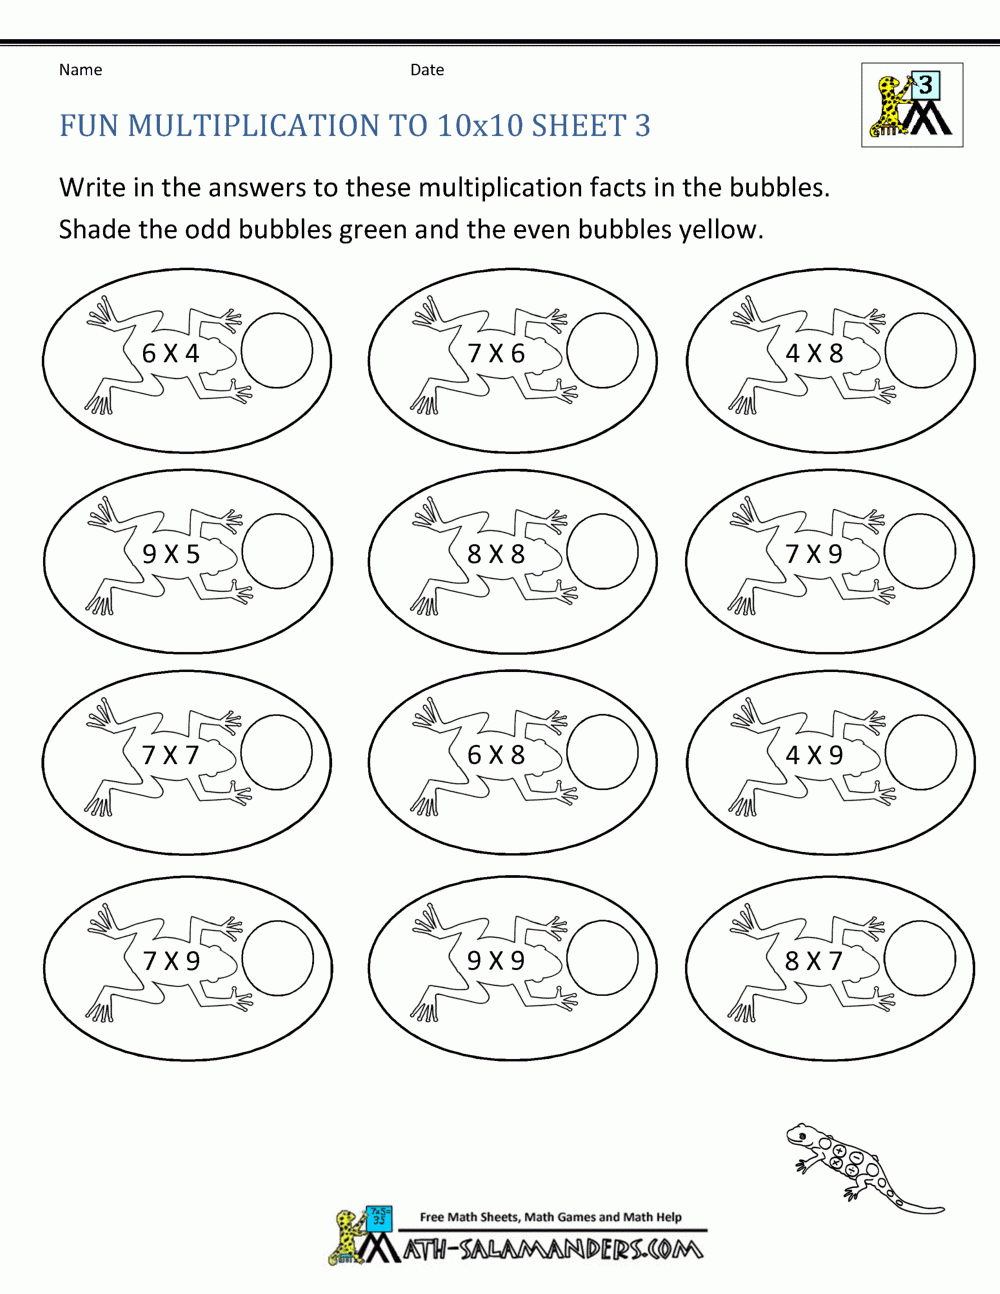 Fun Multiplication Worksheets To 10X10 inside Multiplication Worksheets Year 3